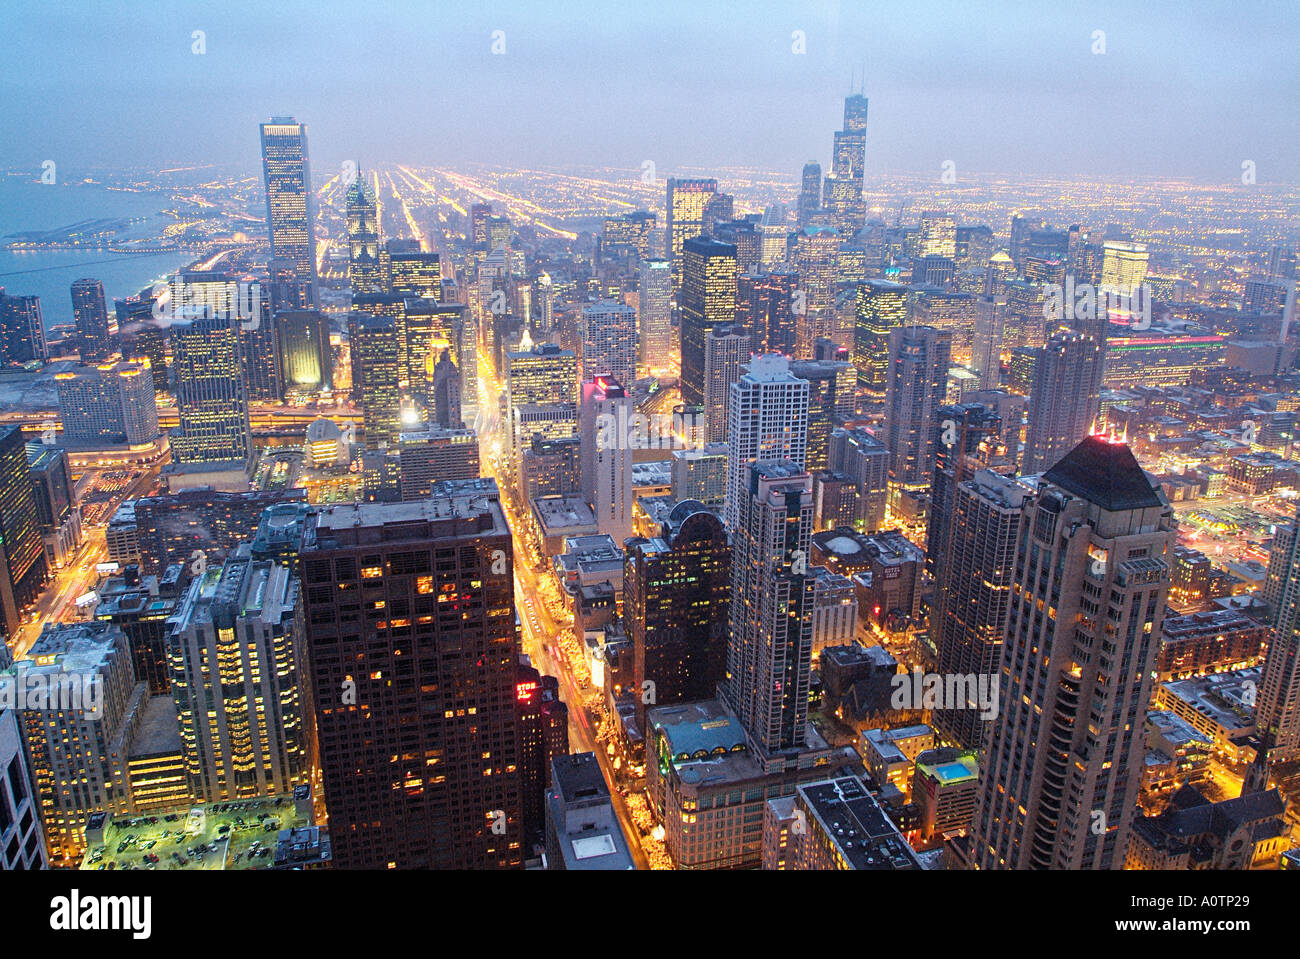 View of Chicago Illinois and Michigan Ave at night Stock Photo